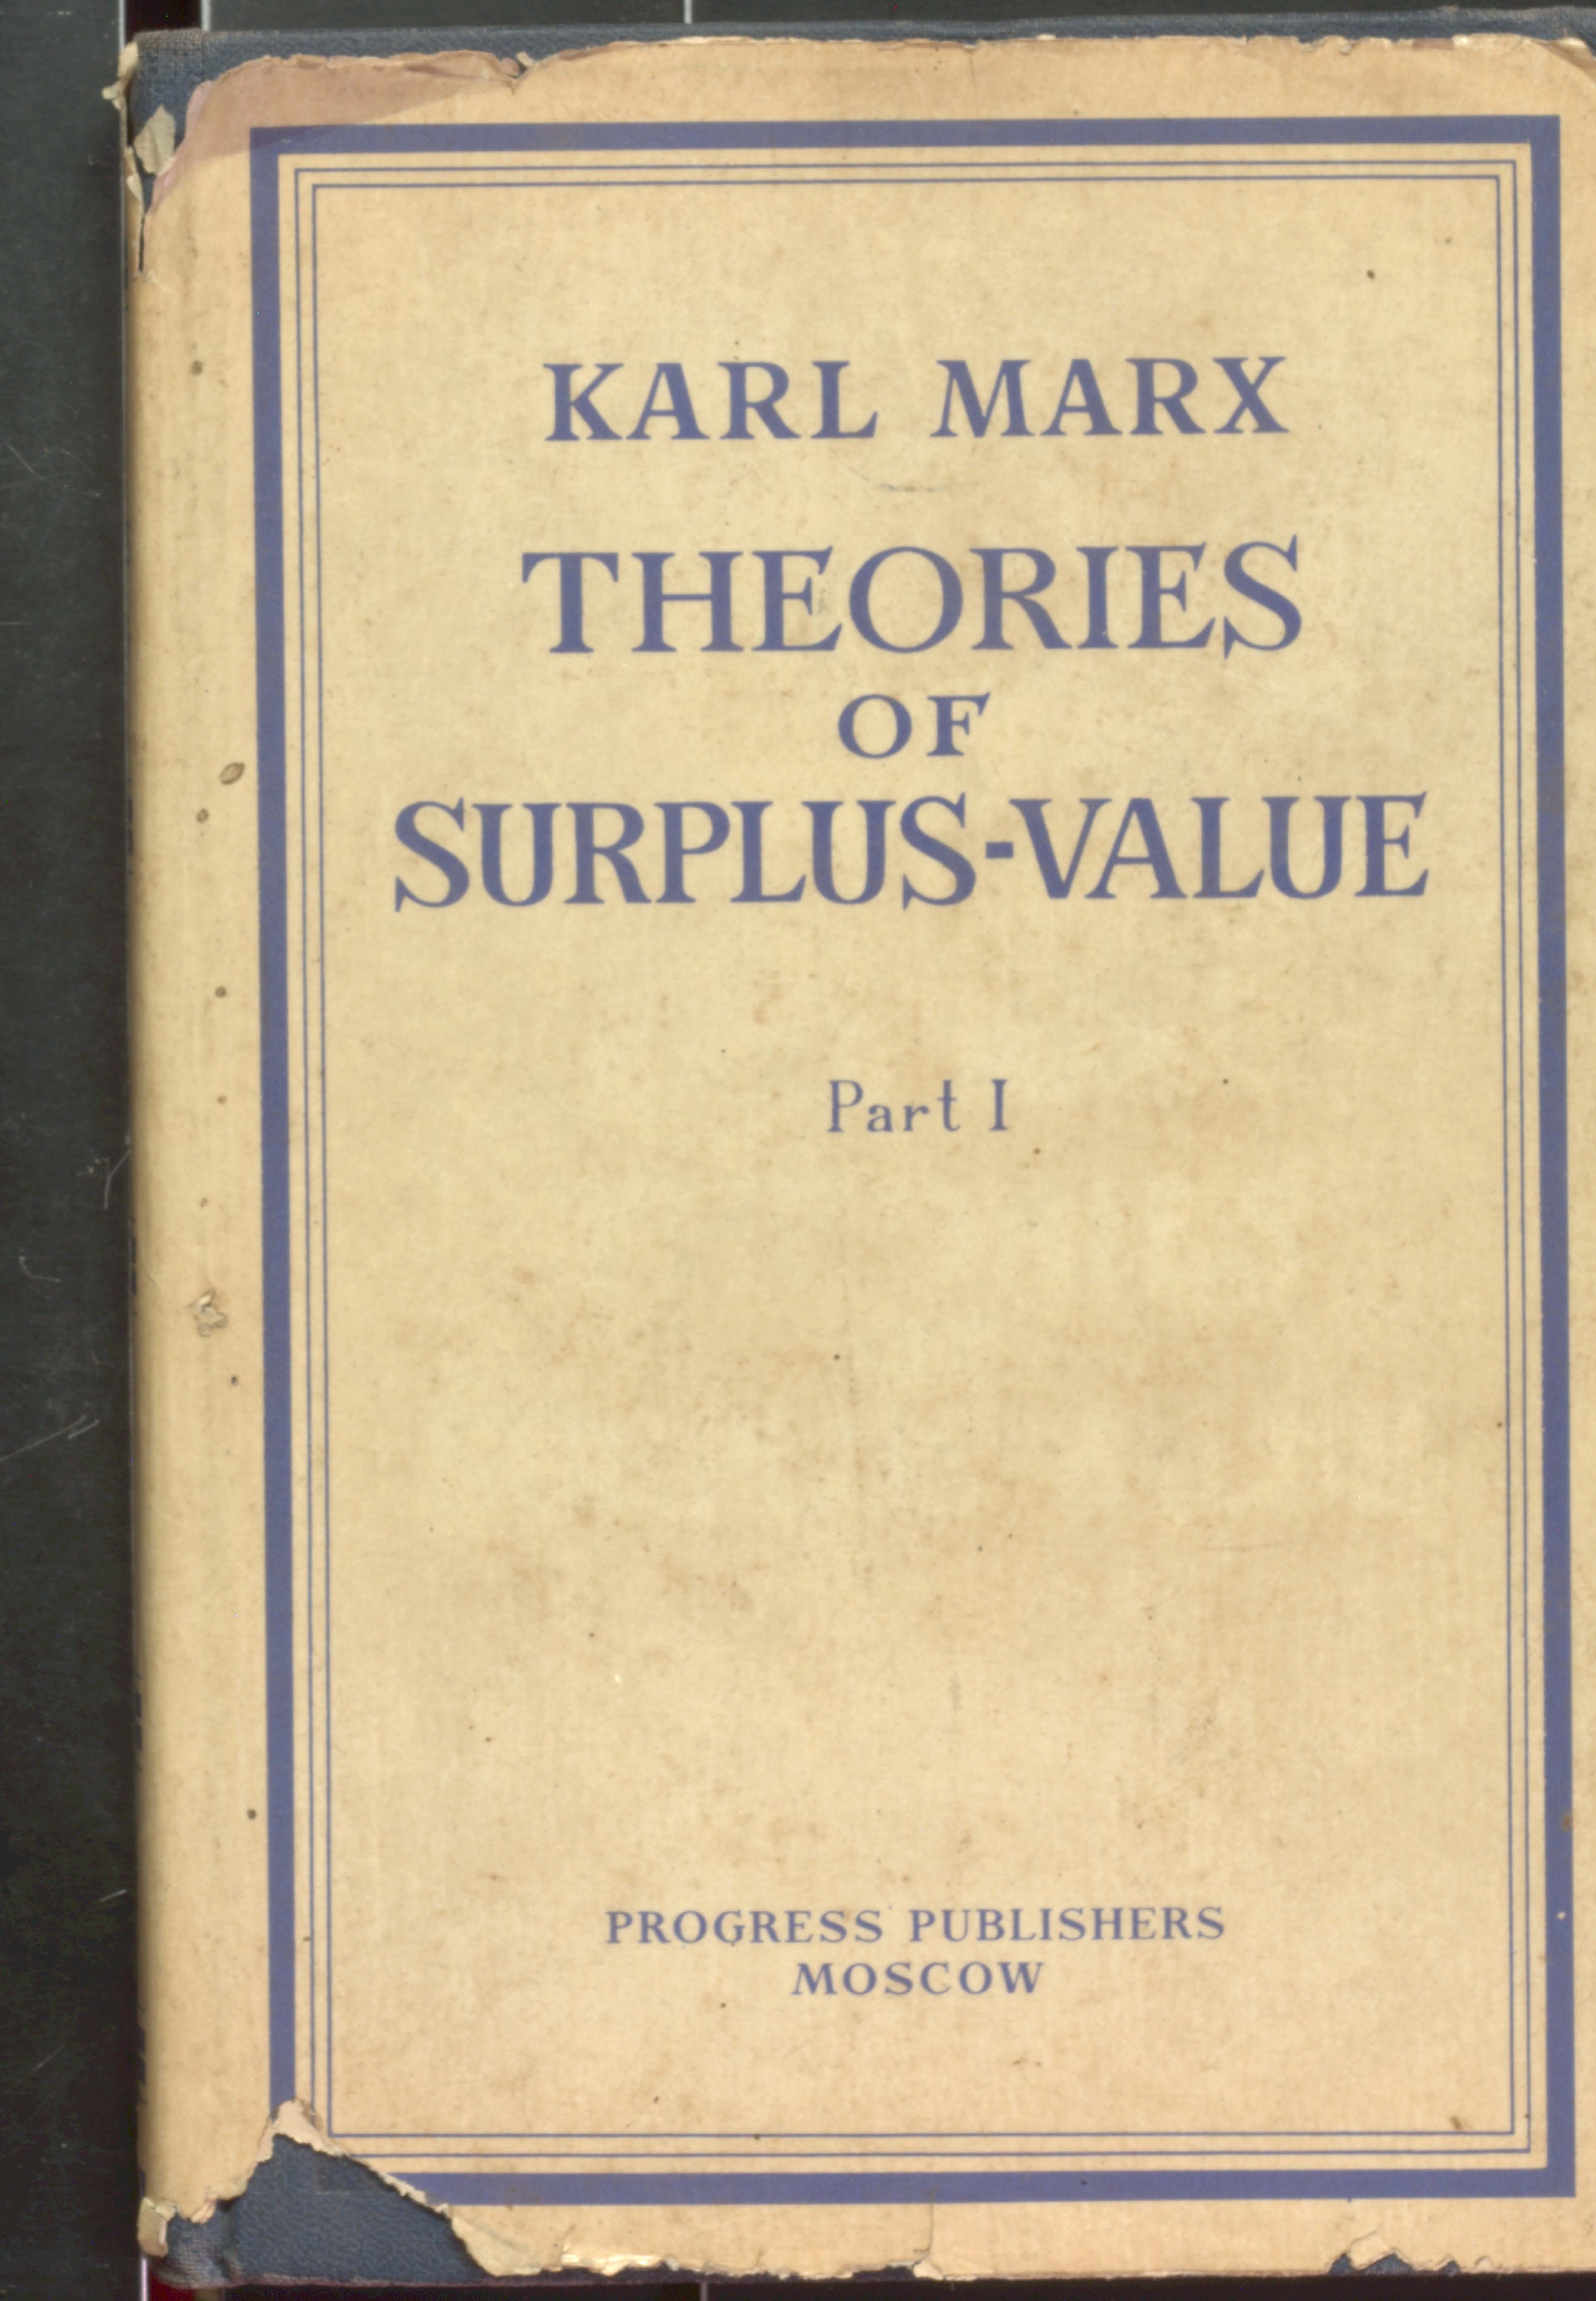 Karl marx theories of surplus-value (party-1)